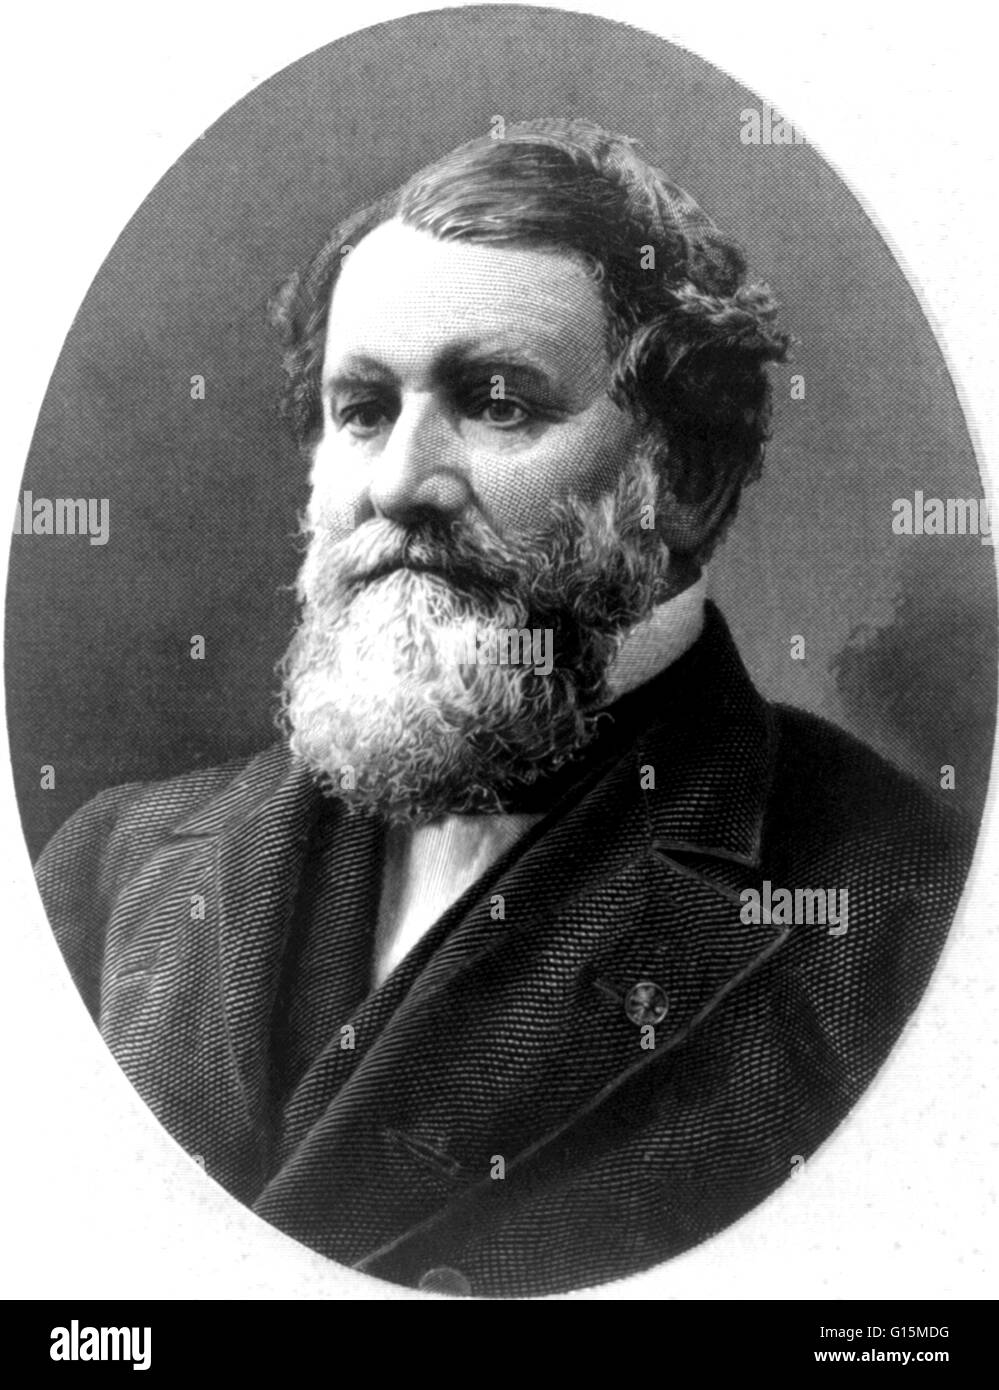 Cyrus Hall McCormick, Sr. (February 15, 1809 - May 13, 1884) was an American inventor and founder of the McCormick Harvesting Machine Company, which became part of International Harvester Company in 1902. Although McCormick is credited as the 'inventor' o Stock Photo